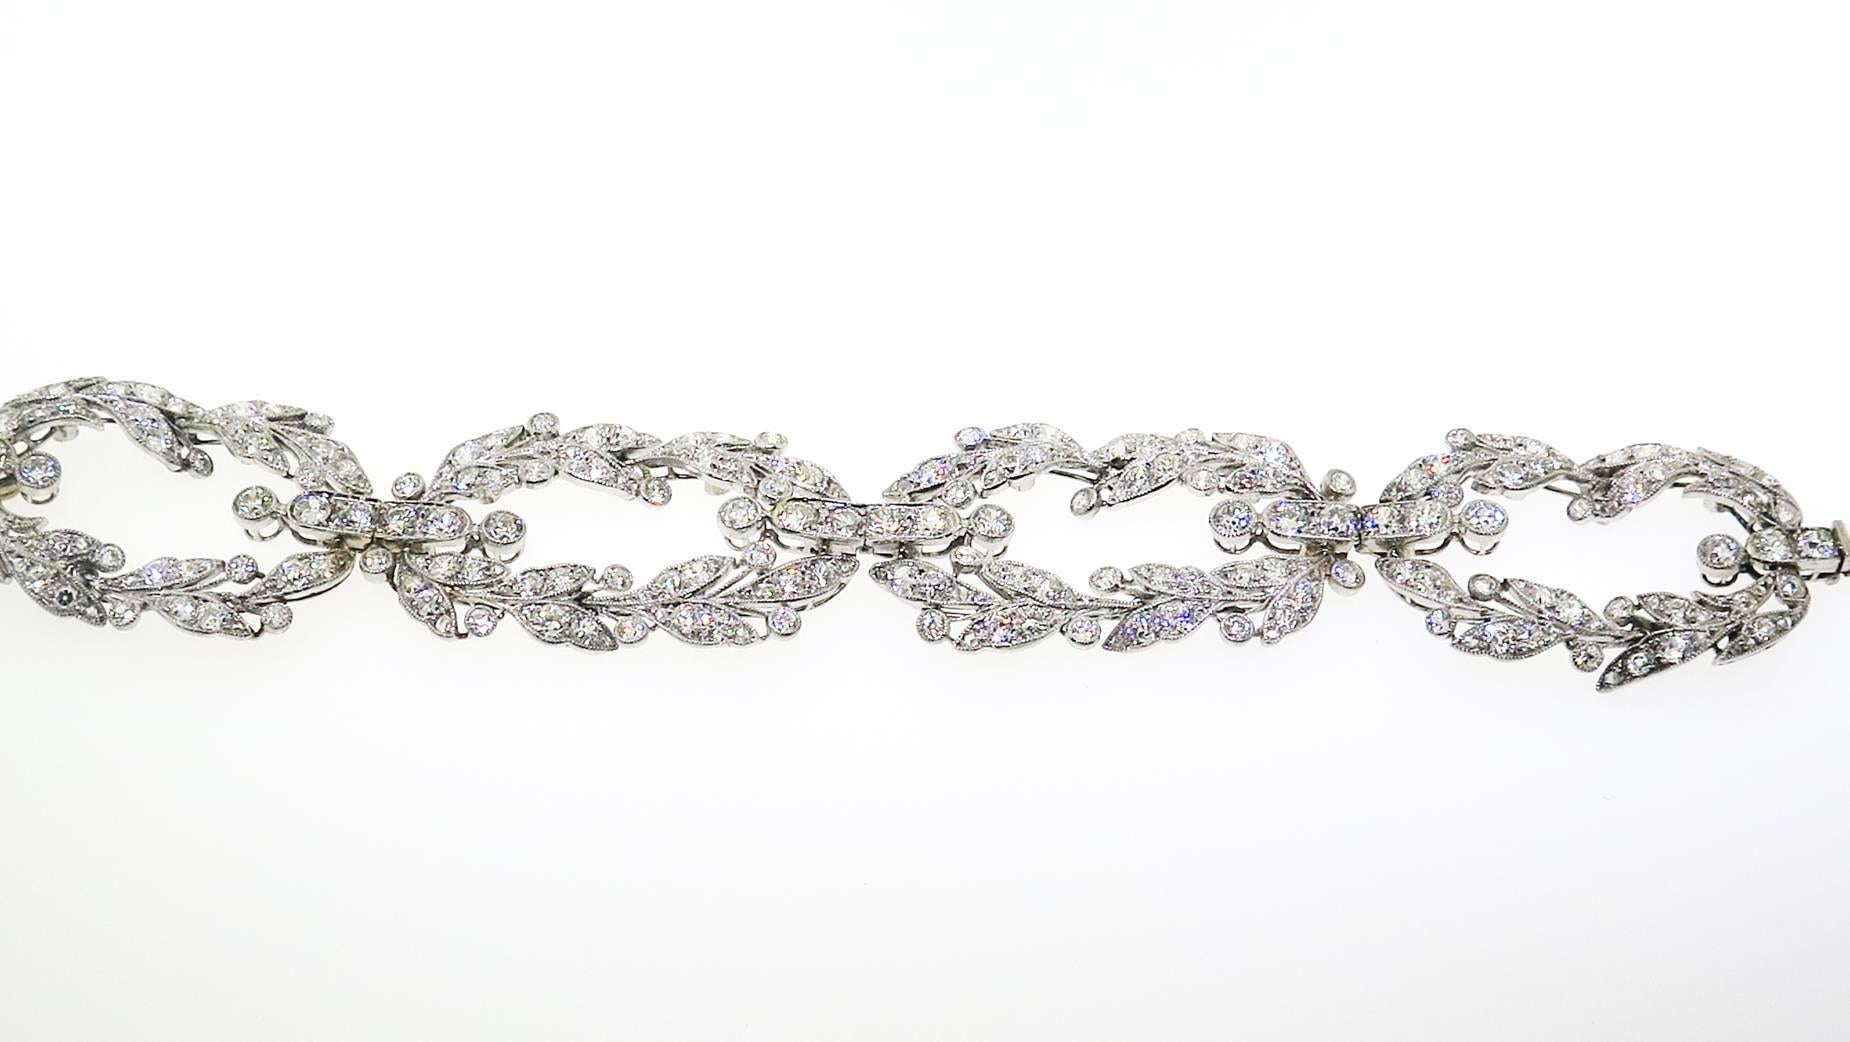 A magnificent bracelet by Cartier, designed with a broad leaf design centering  diamonds in oval shaped flowing towards a beautiful clasp accented with round diamonds; platinum, circa 1900s, 170 round diamonds, with a total weight 16 carats.